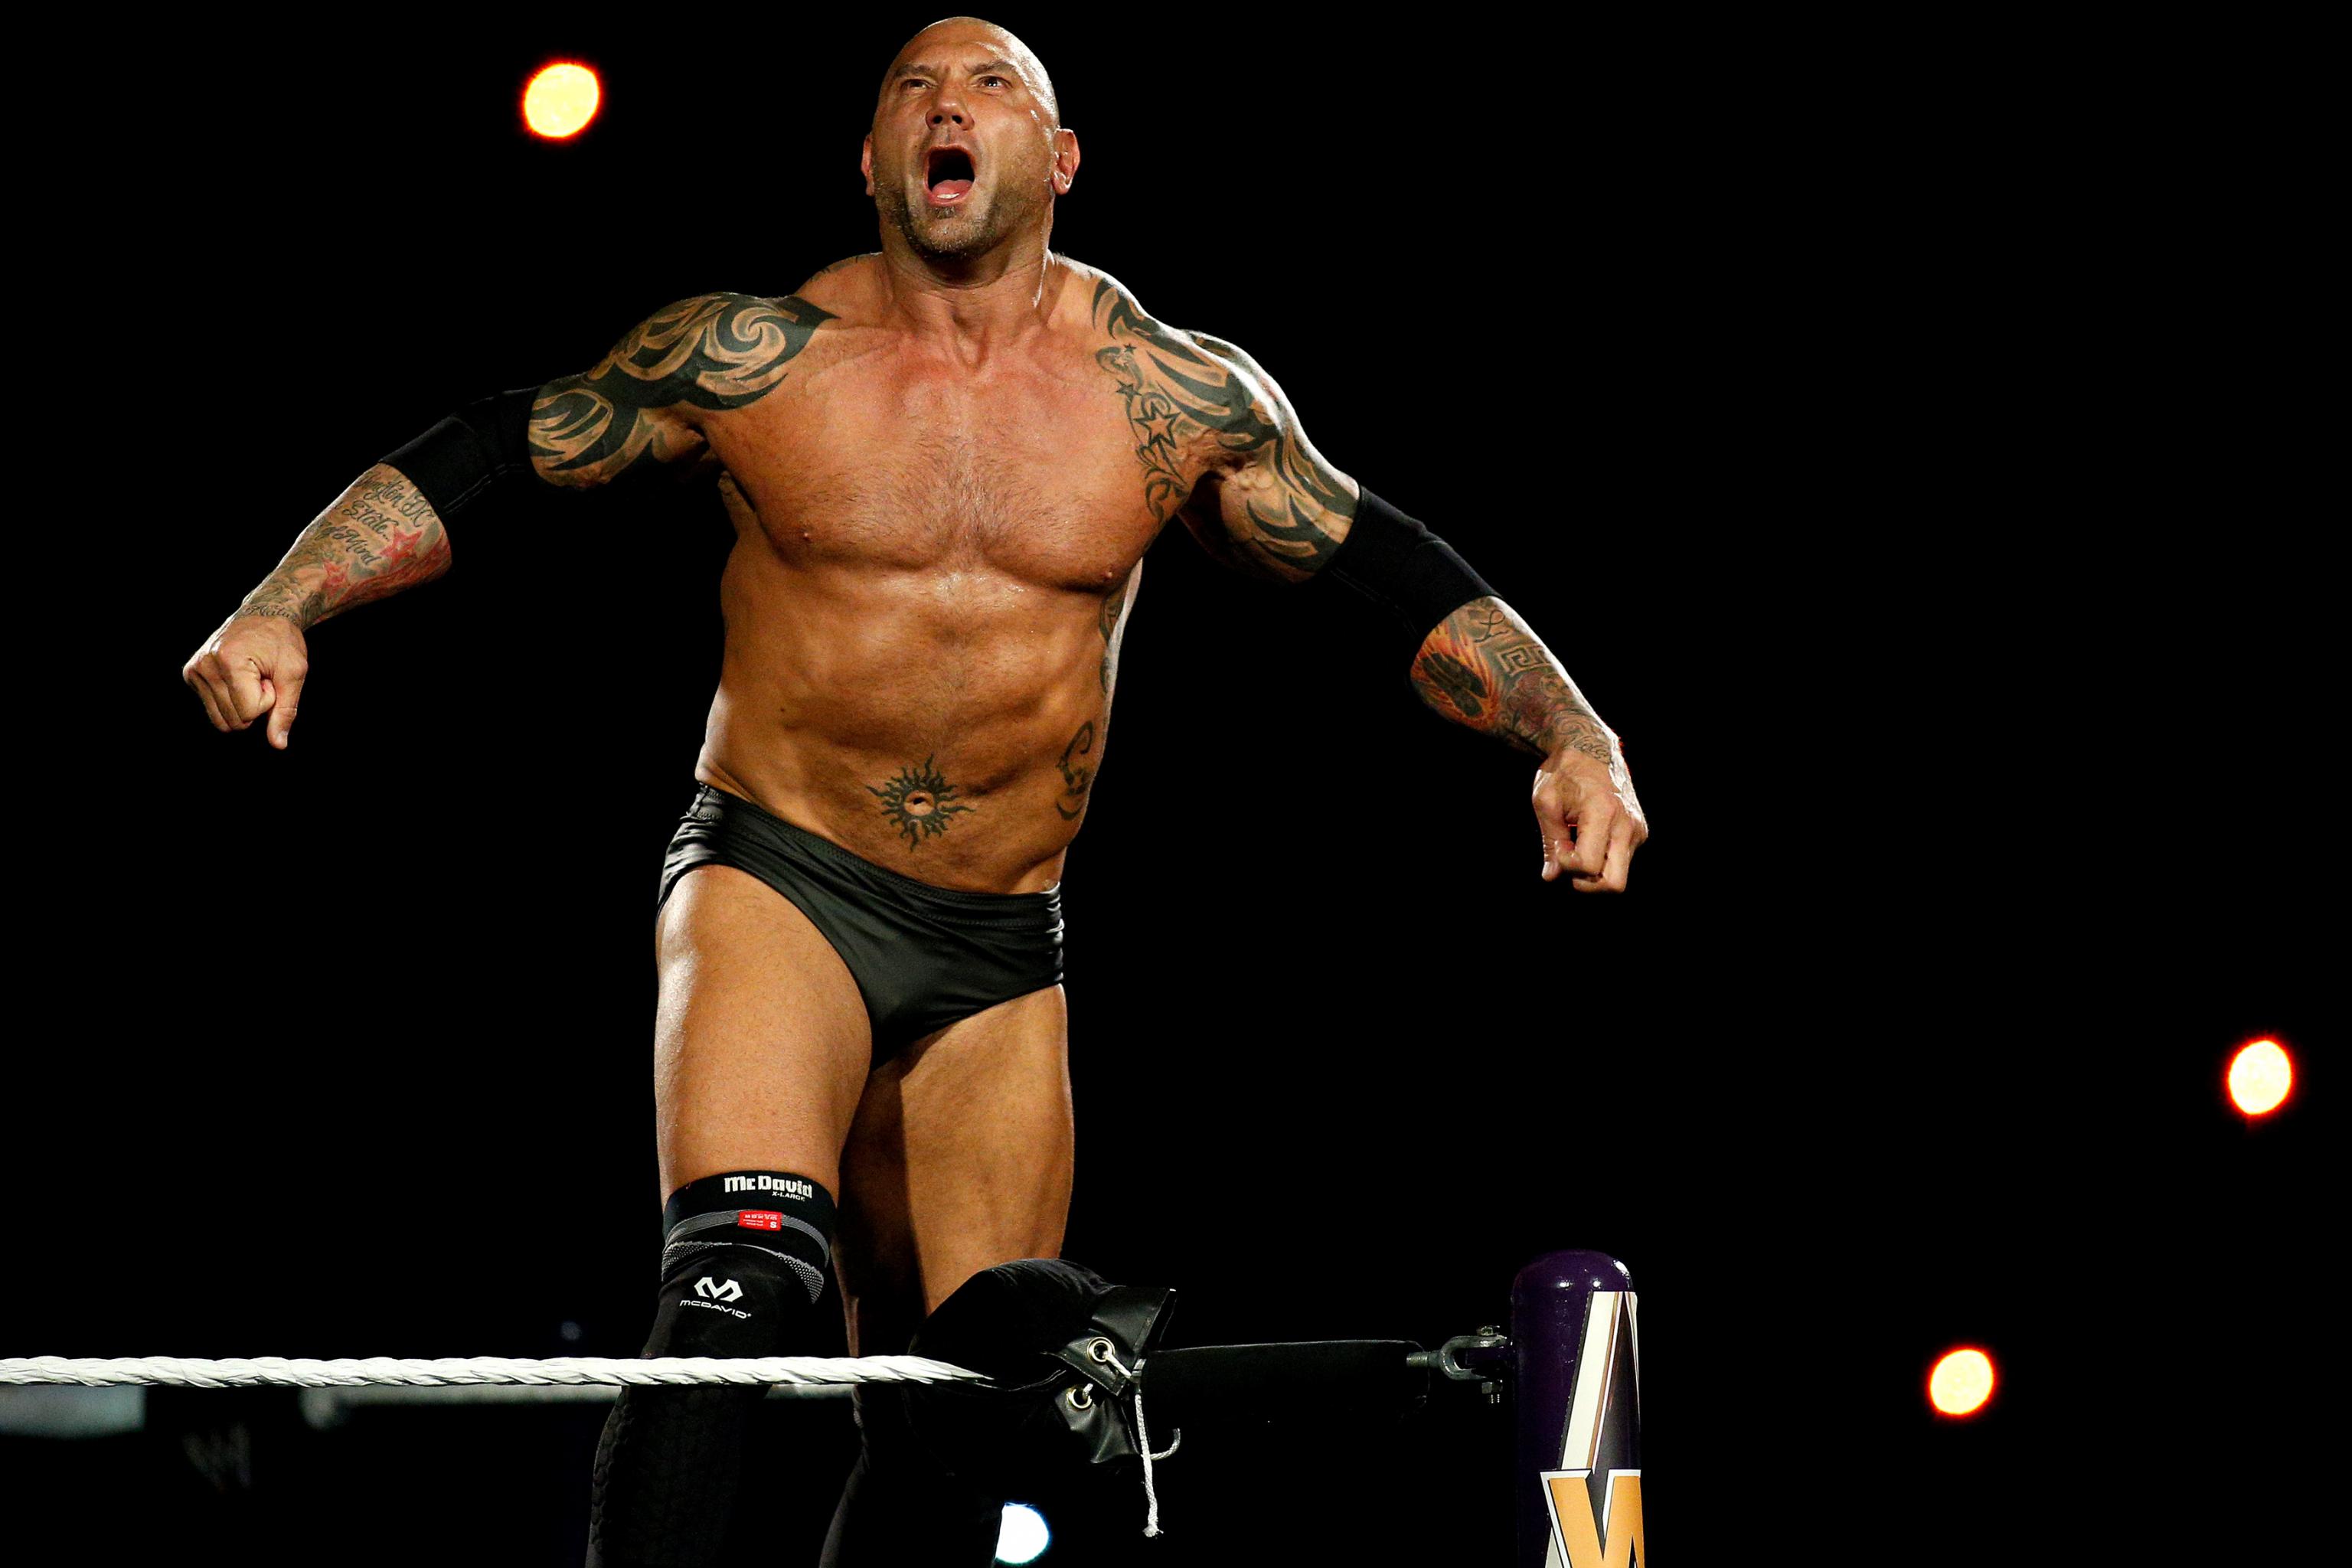 Wwe Raw Bf Xxx - Watch Dave Bautista Attack Ric Flair, Call Out Triple H in WWE Raw ...